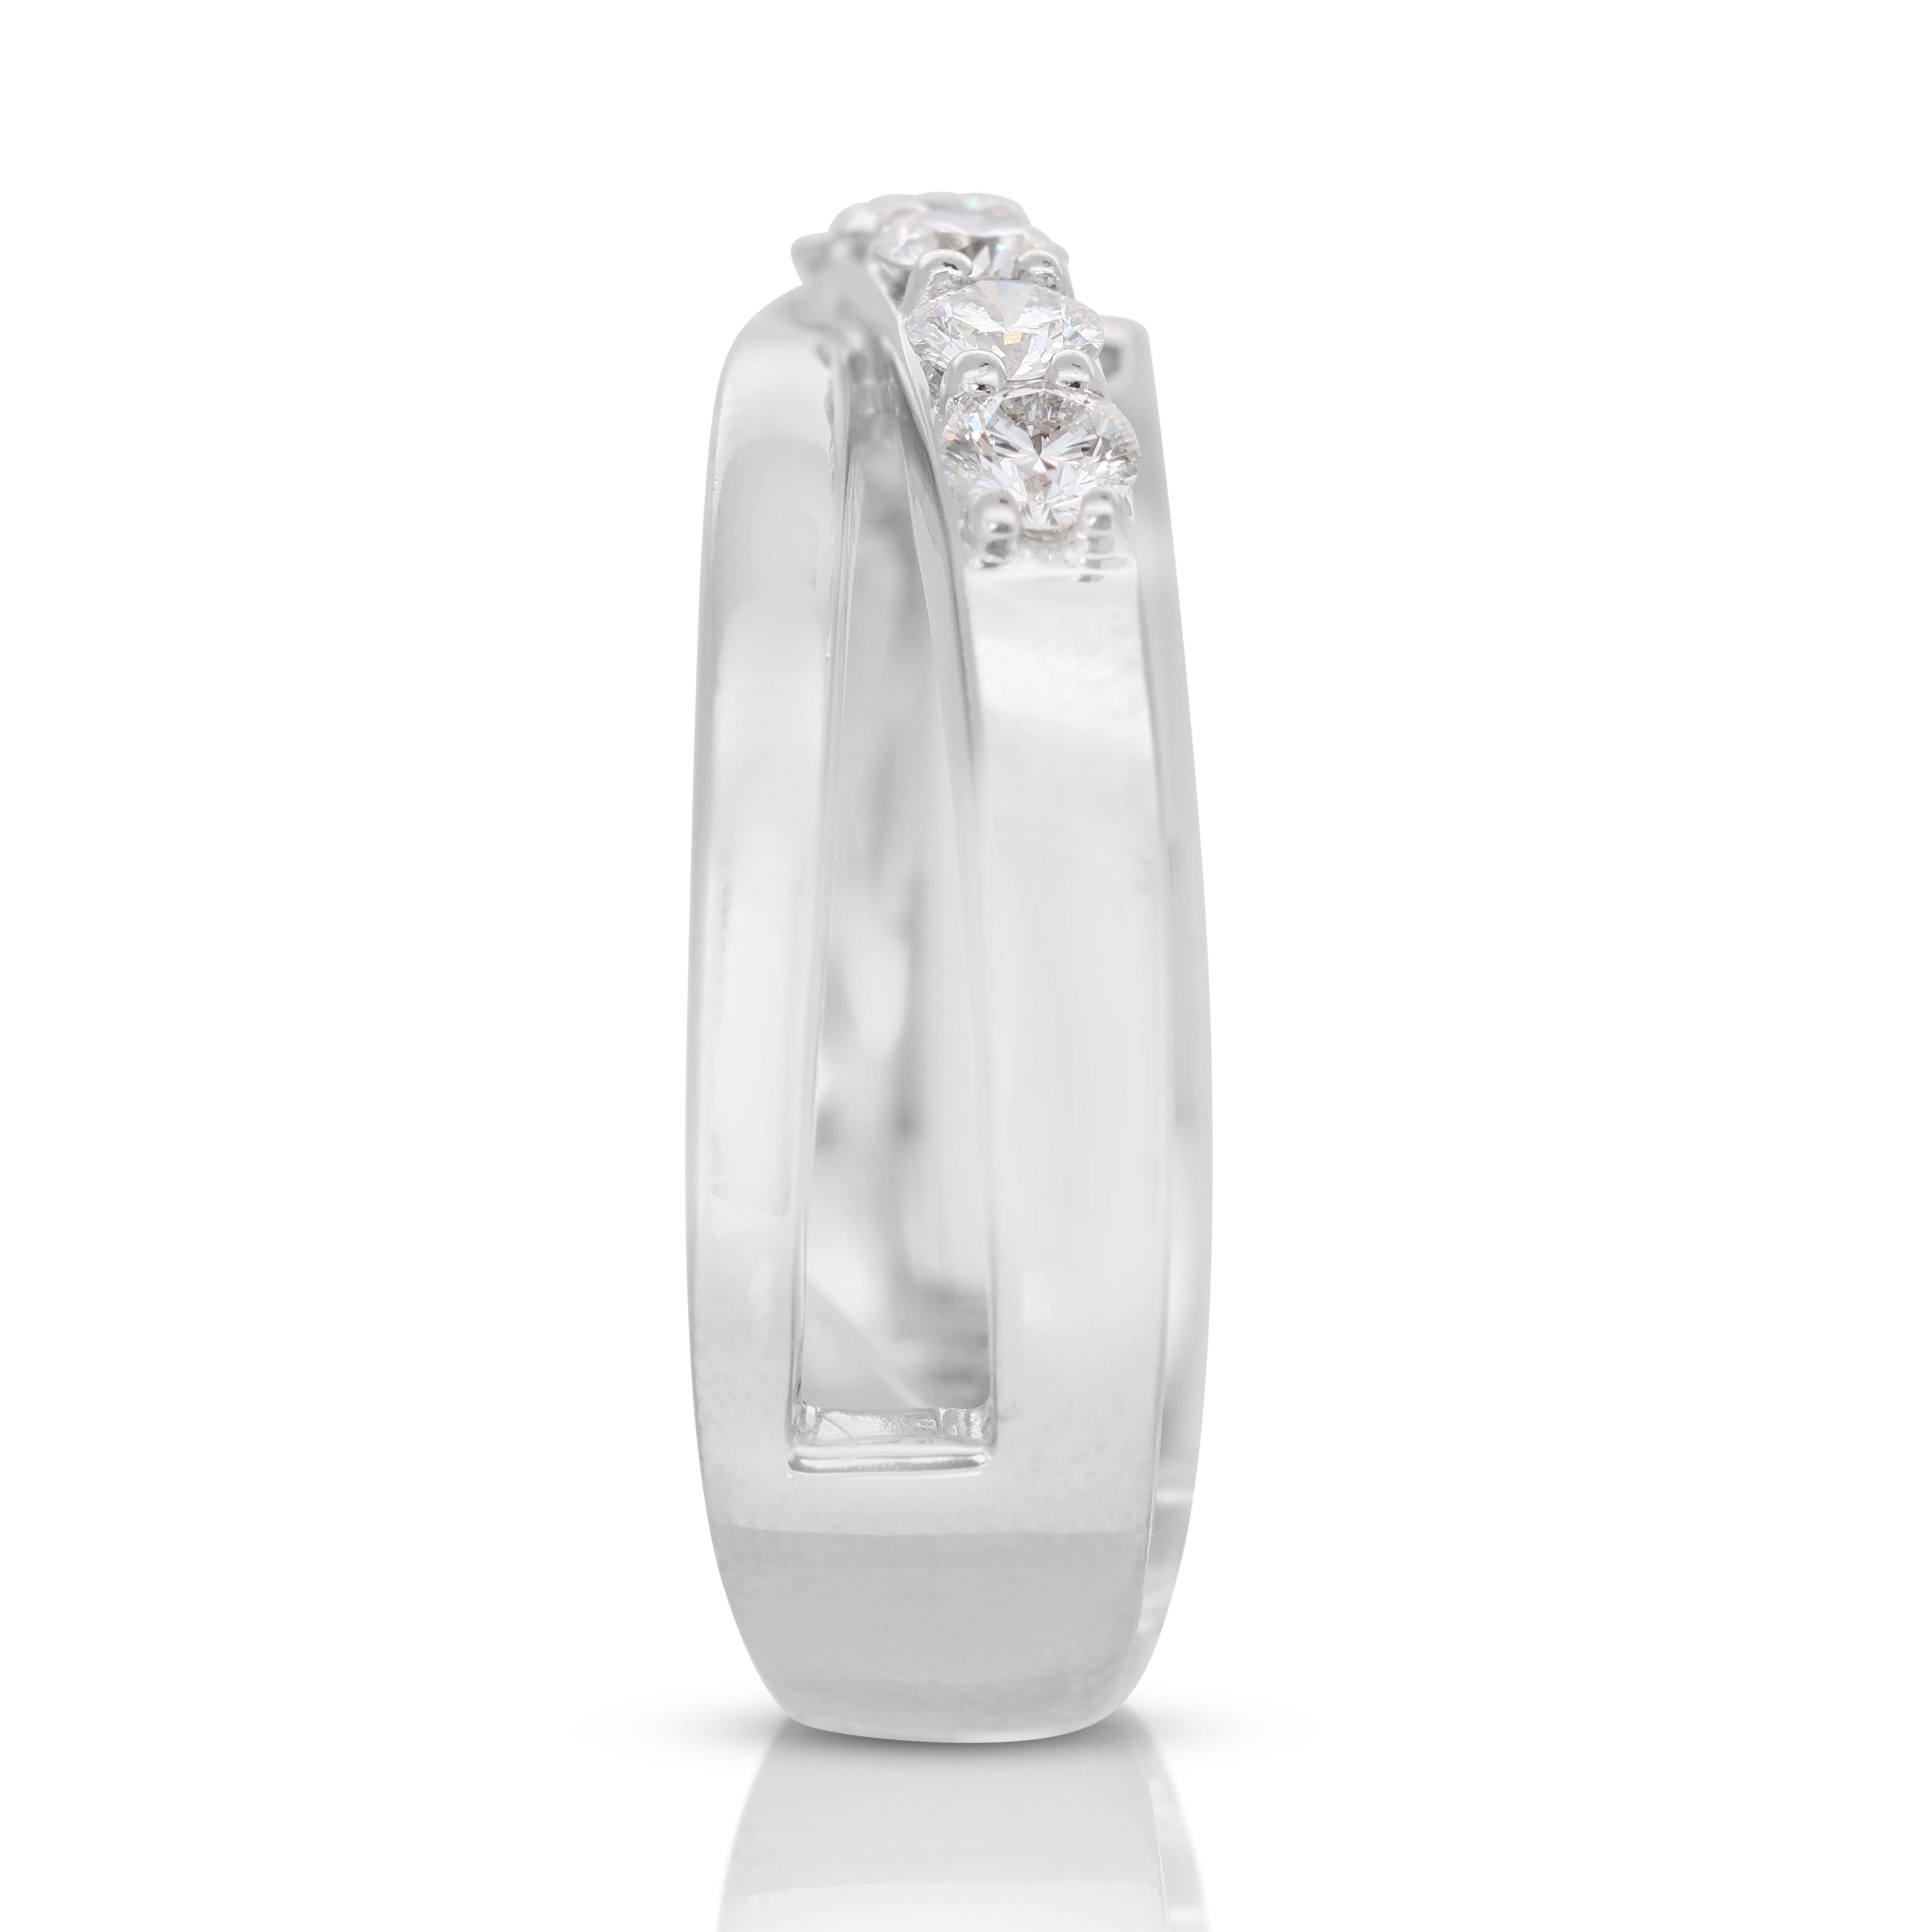 Women's Luxurious 18K White Gold Diamond Ring with 0.49 ct Natural Diamonds For Sale